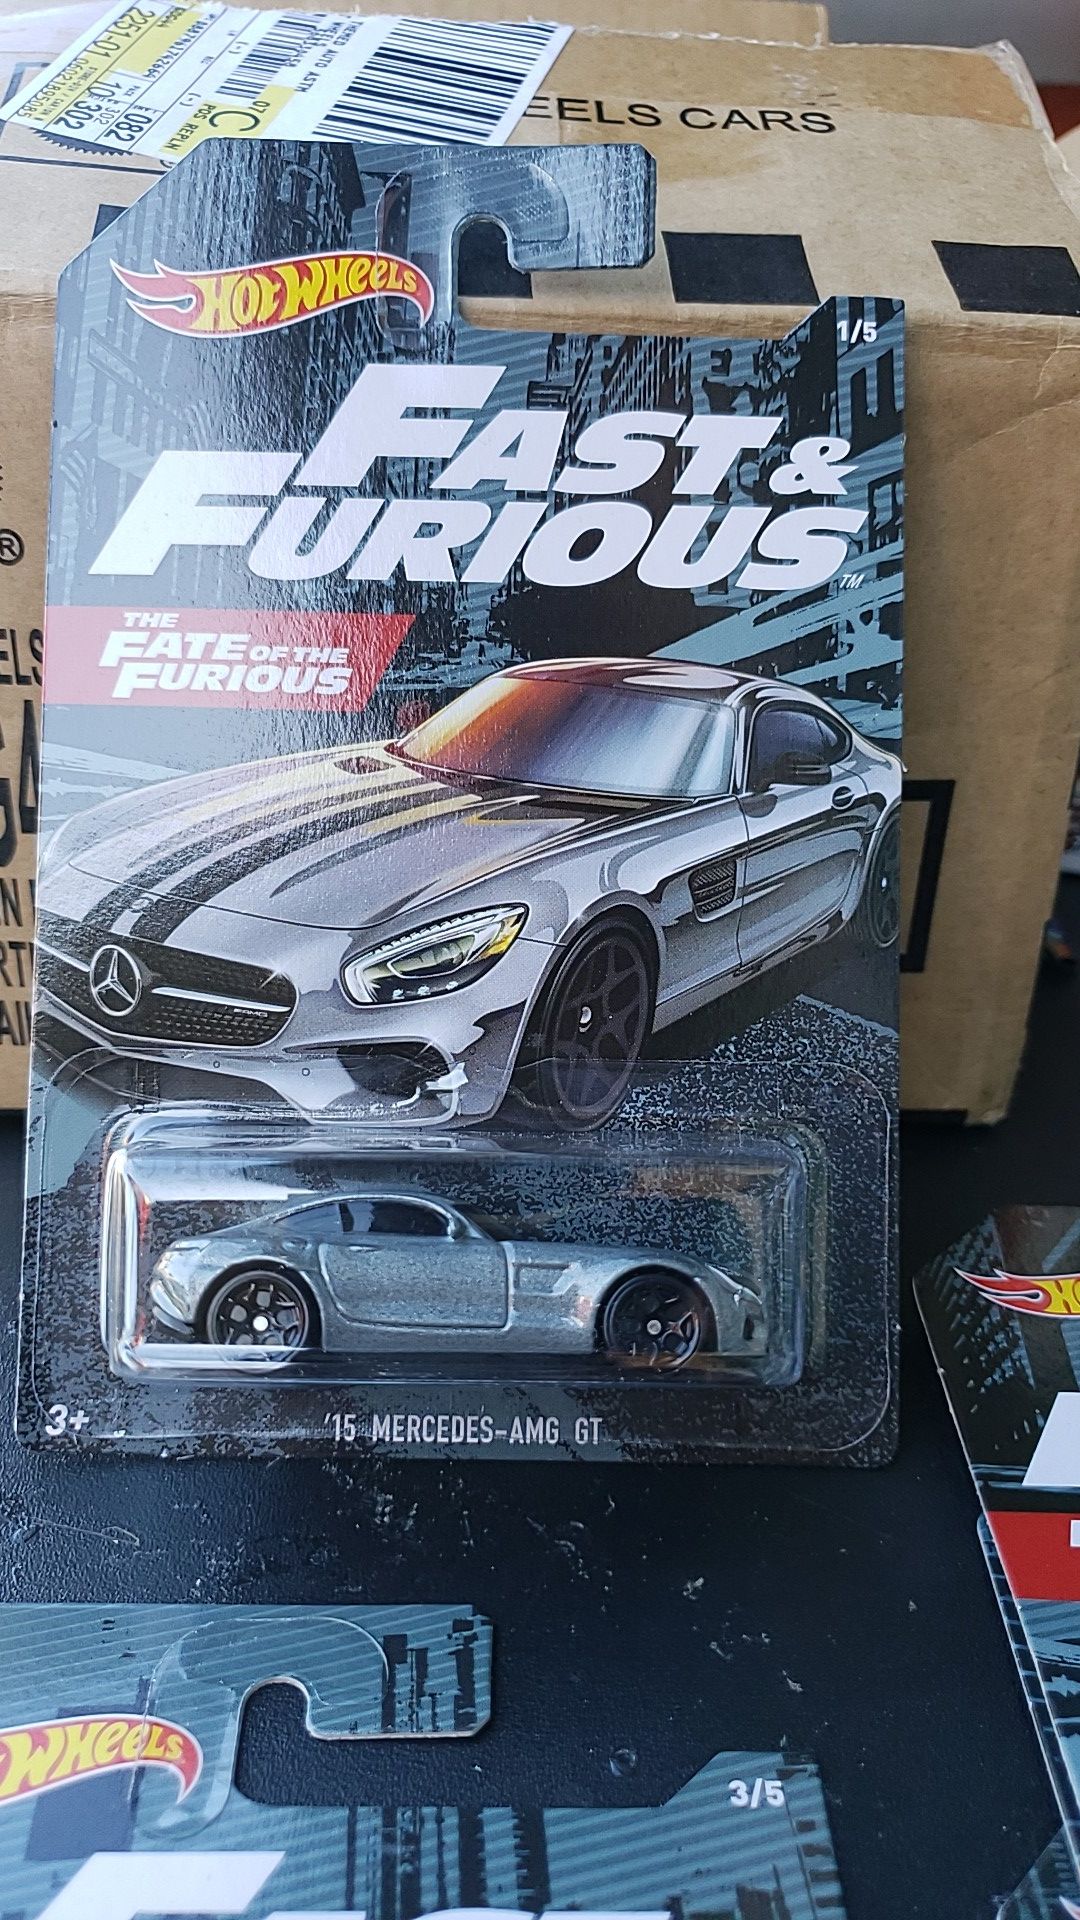 HOT WHEELS DIE CAST COLLECTIBLE FAST AND FURIOUS CARS $ 4 EACH PICK UP IN WHITTIER THANKS 😊